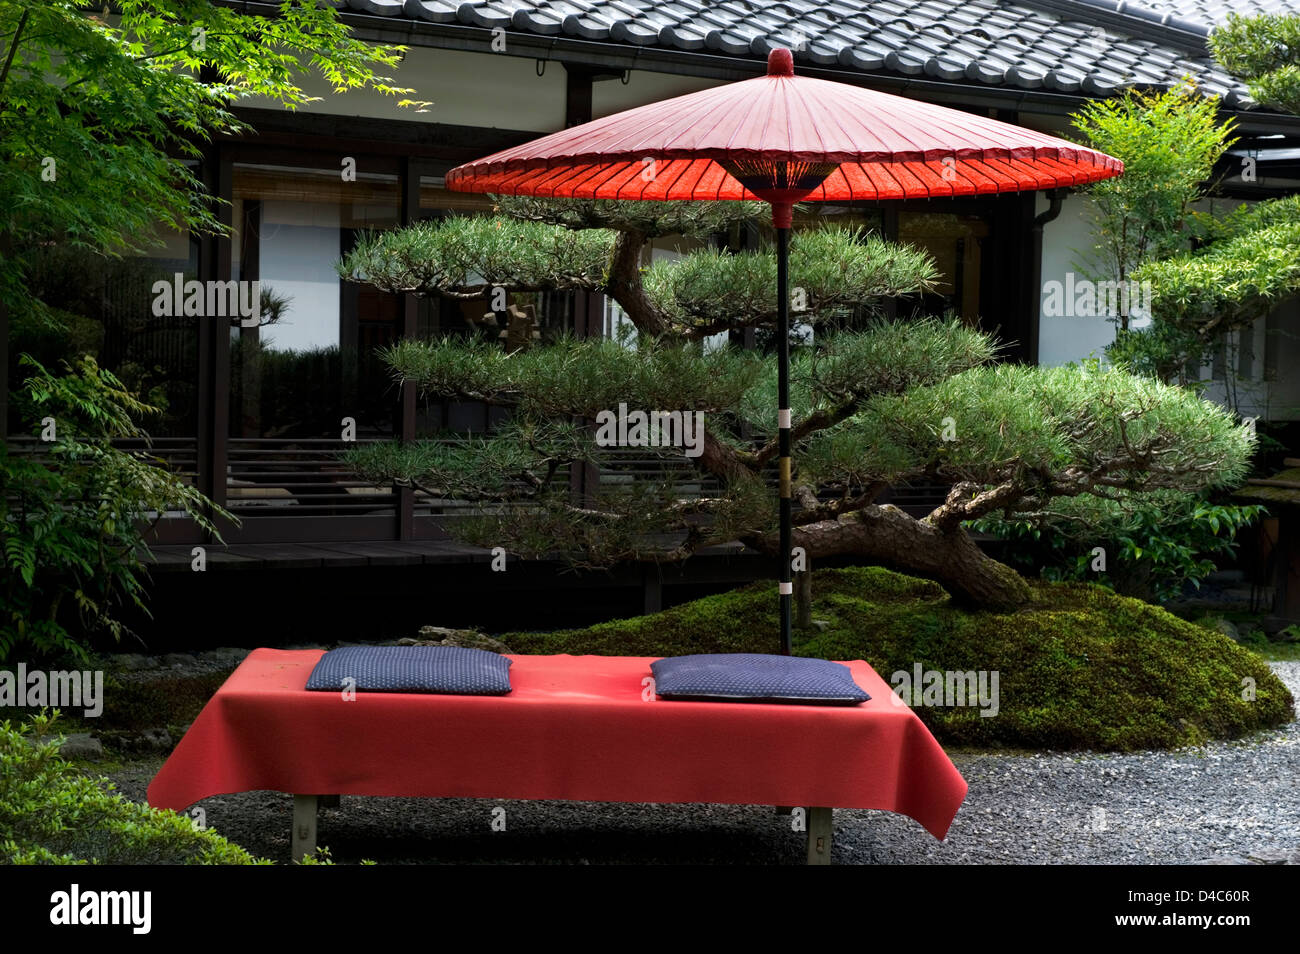 A quintessential Japanese garden scene with red paper umbrella and velvet resting bench, Ohara, Kyoto, Japan Stock Photo